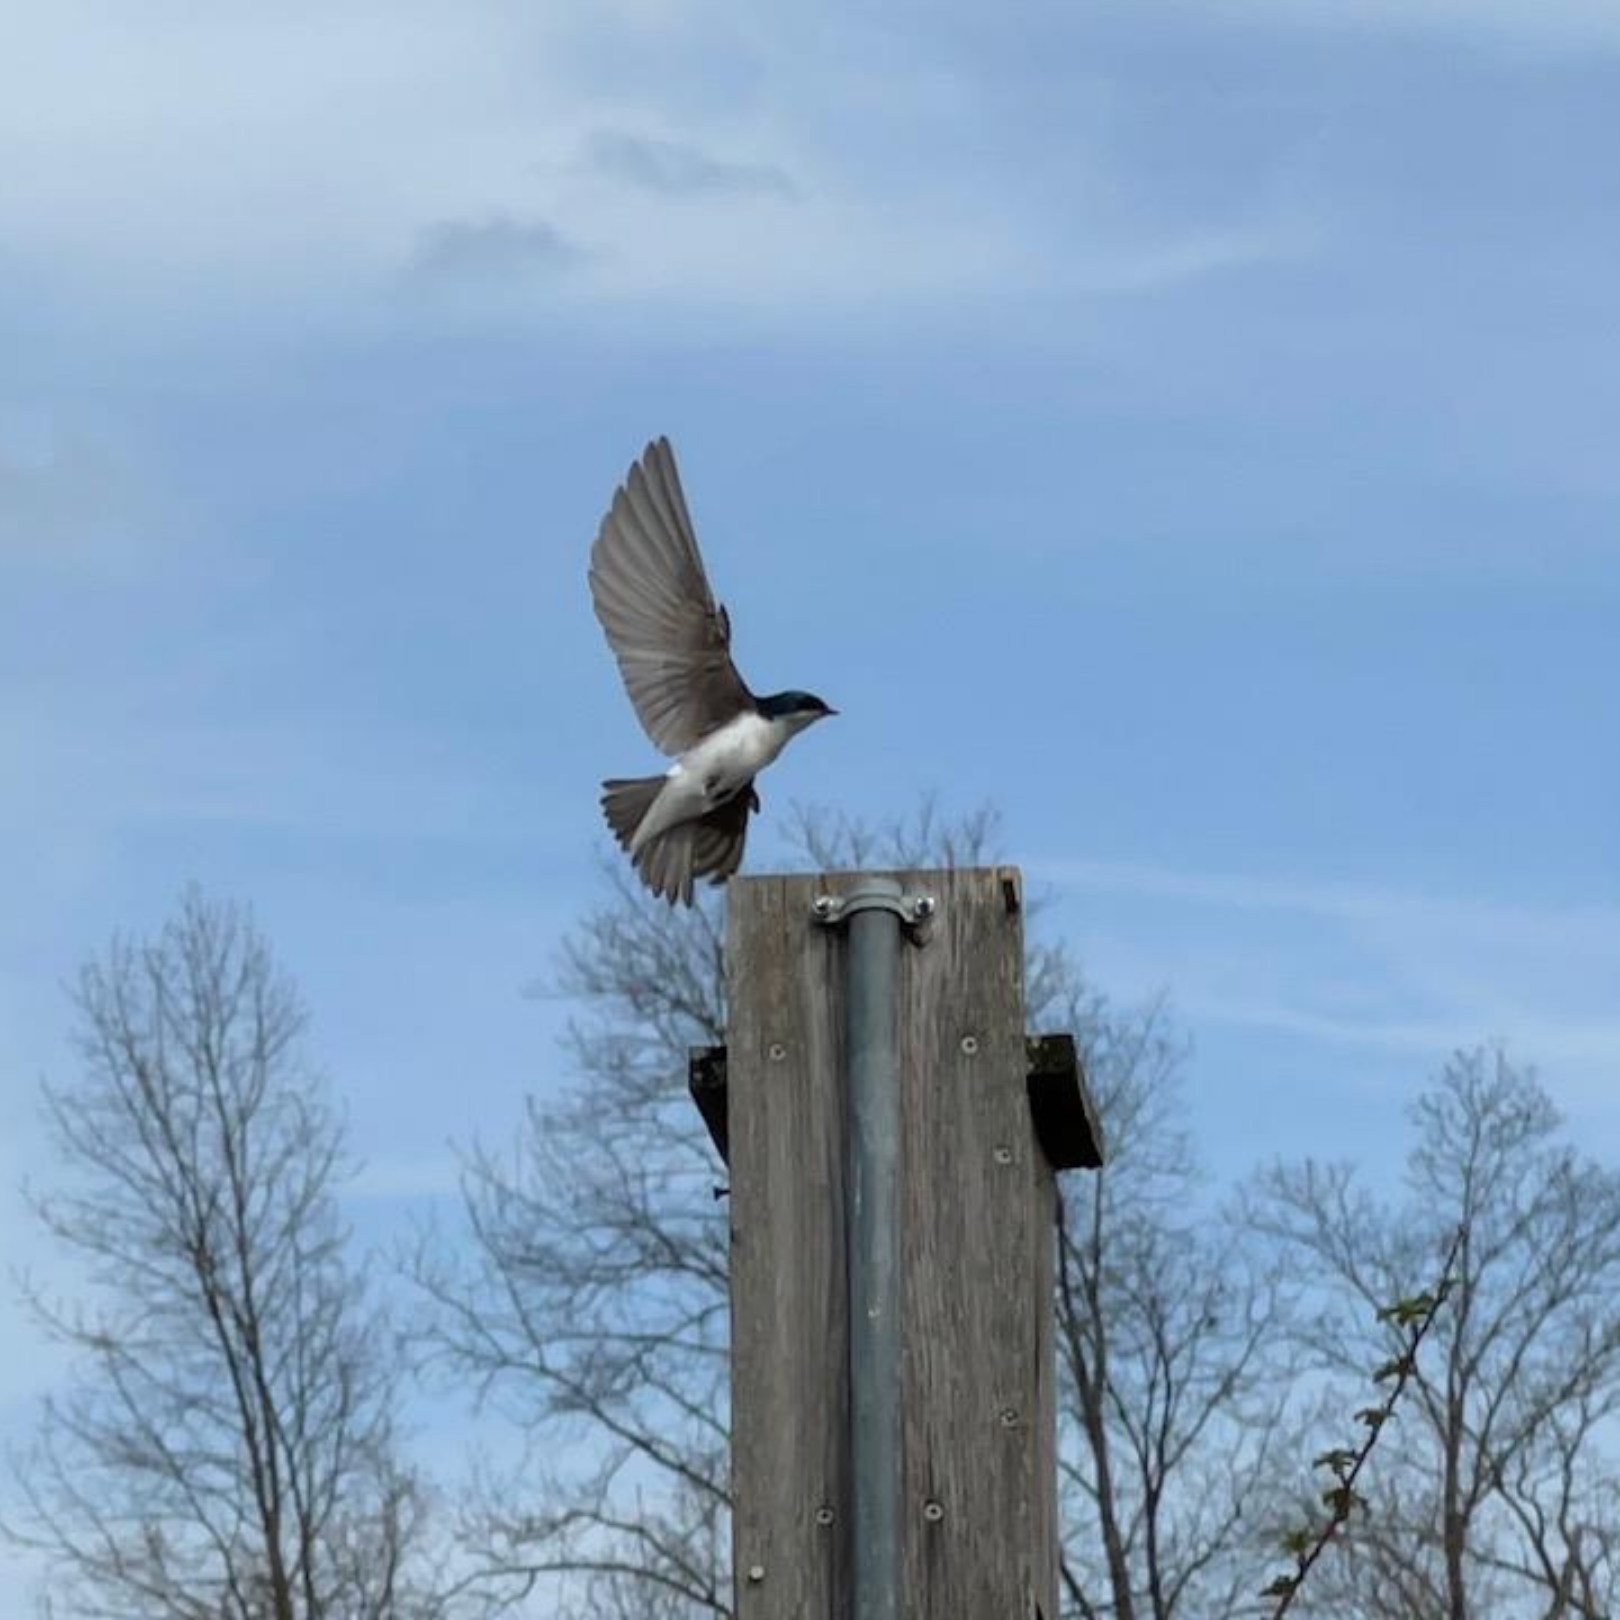 A tree swallow landing on a tall wooden poll